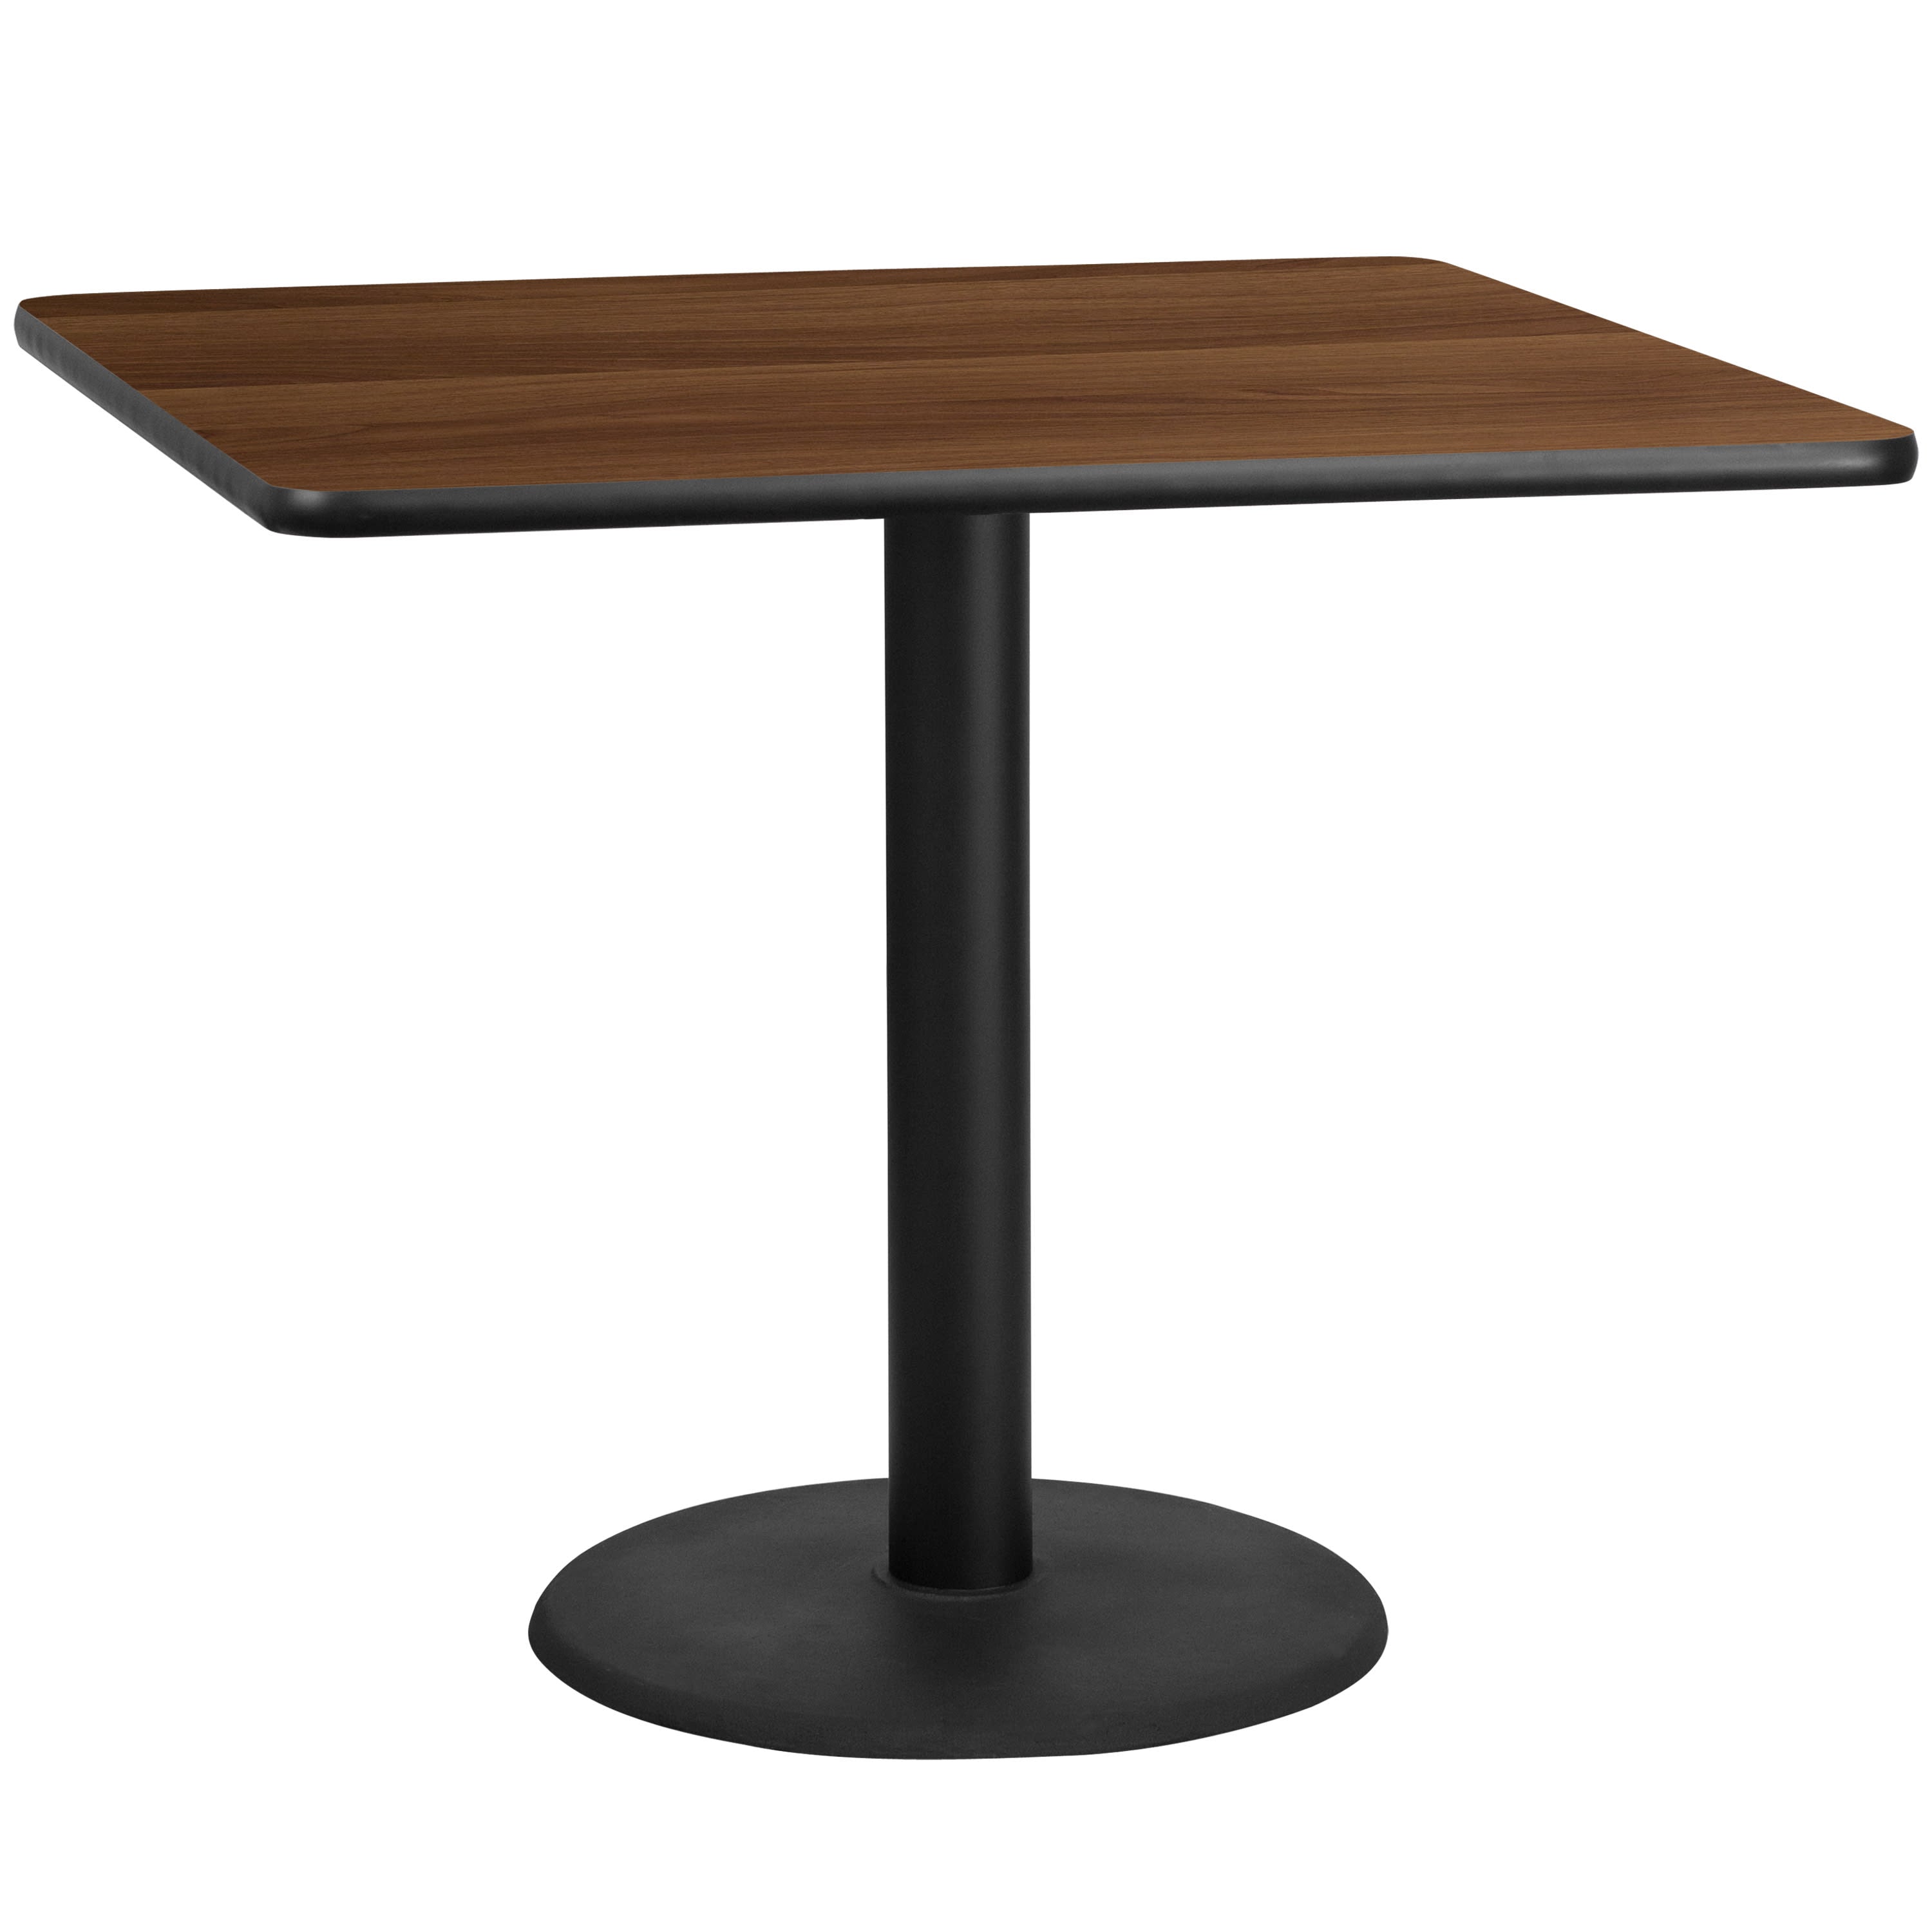 42' Square Laminate Table Top with 24' Round Table Height Base